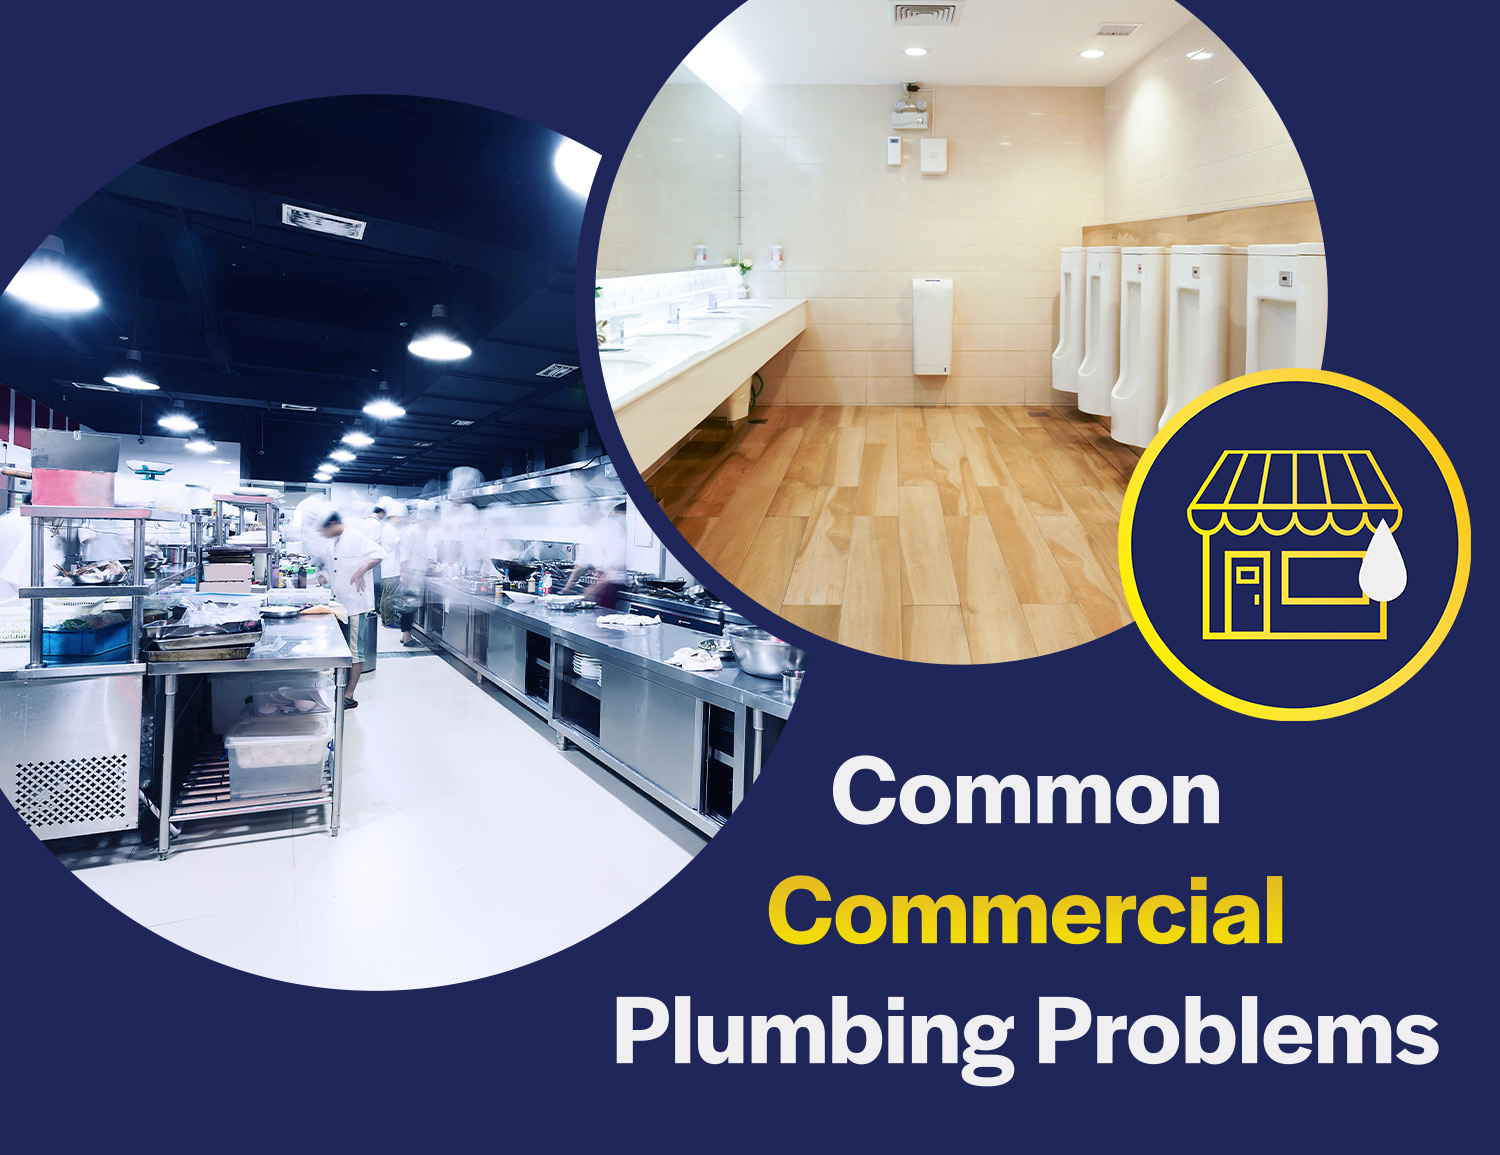 Common Commercial Plumbing Problems